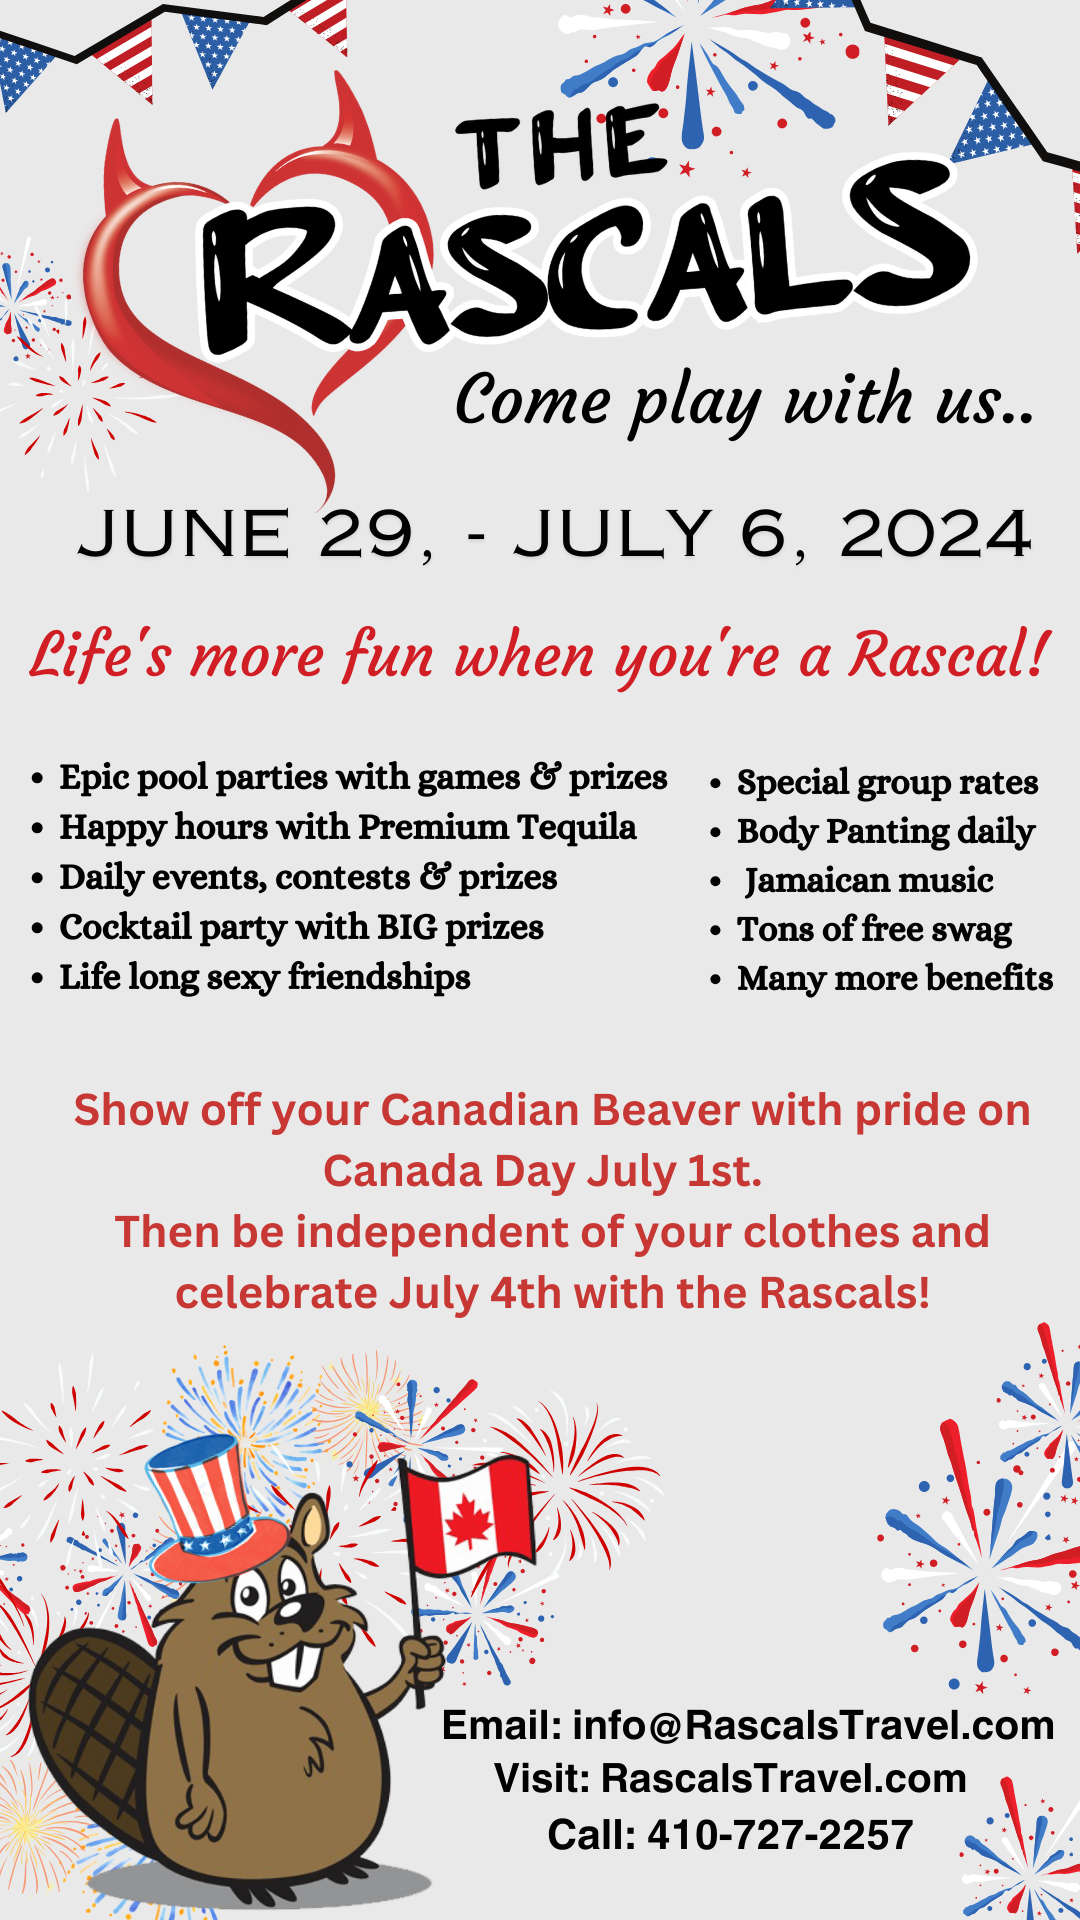 Group Event - Rascals Independence day - June 29 - July 6, 2024 - Hedonism II Resort, Negril Jamaica